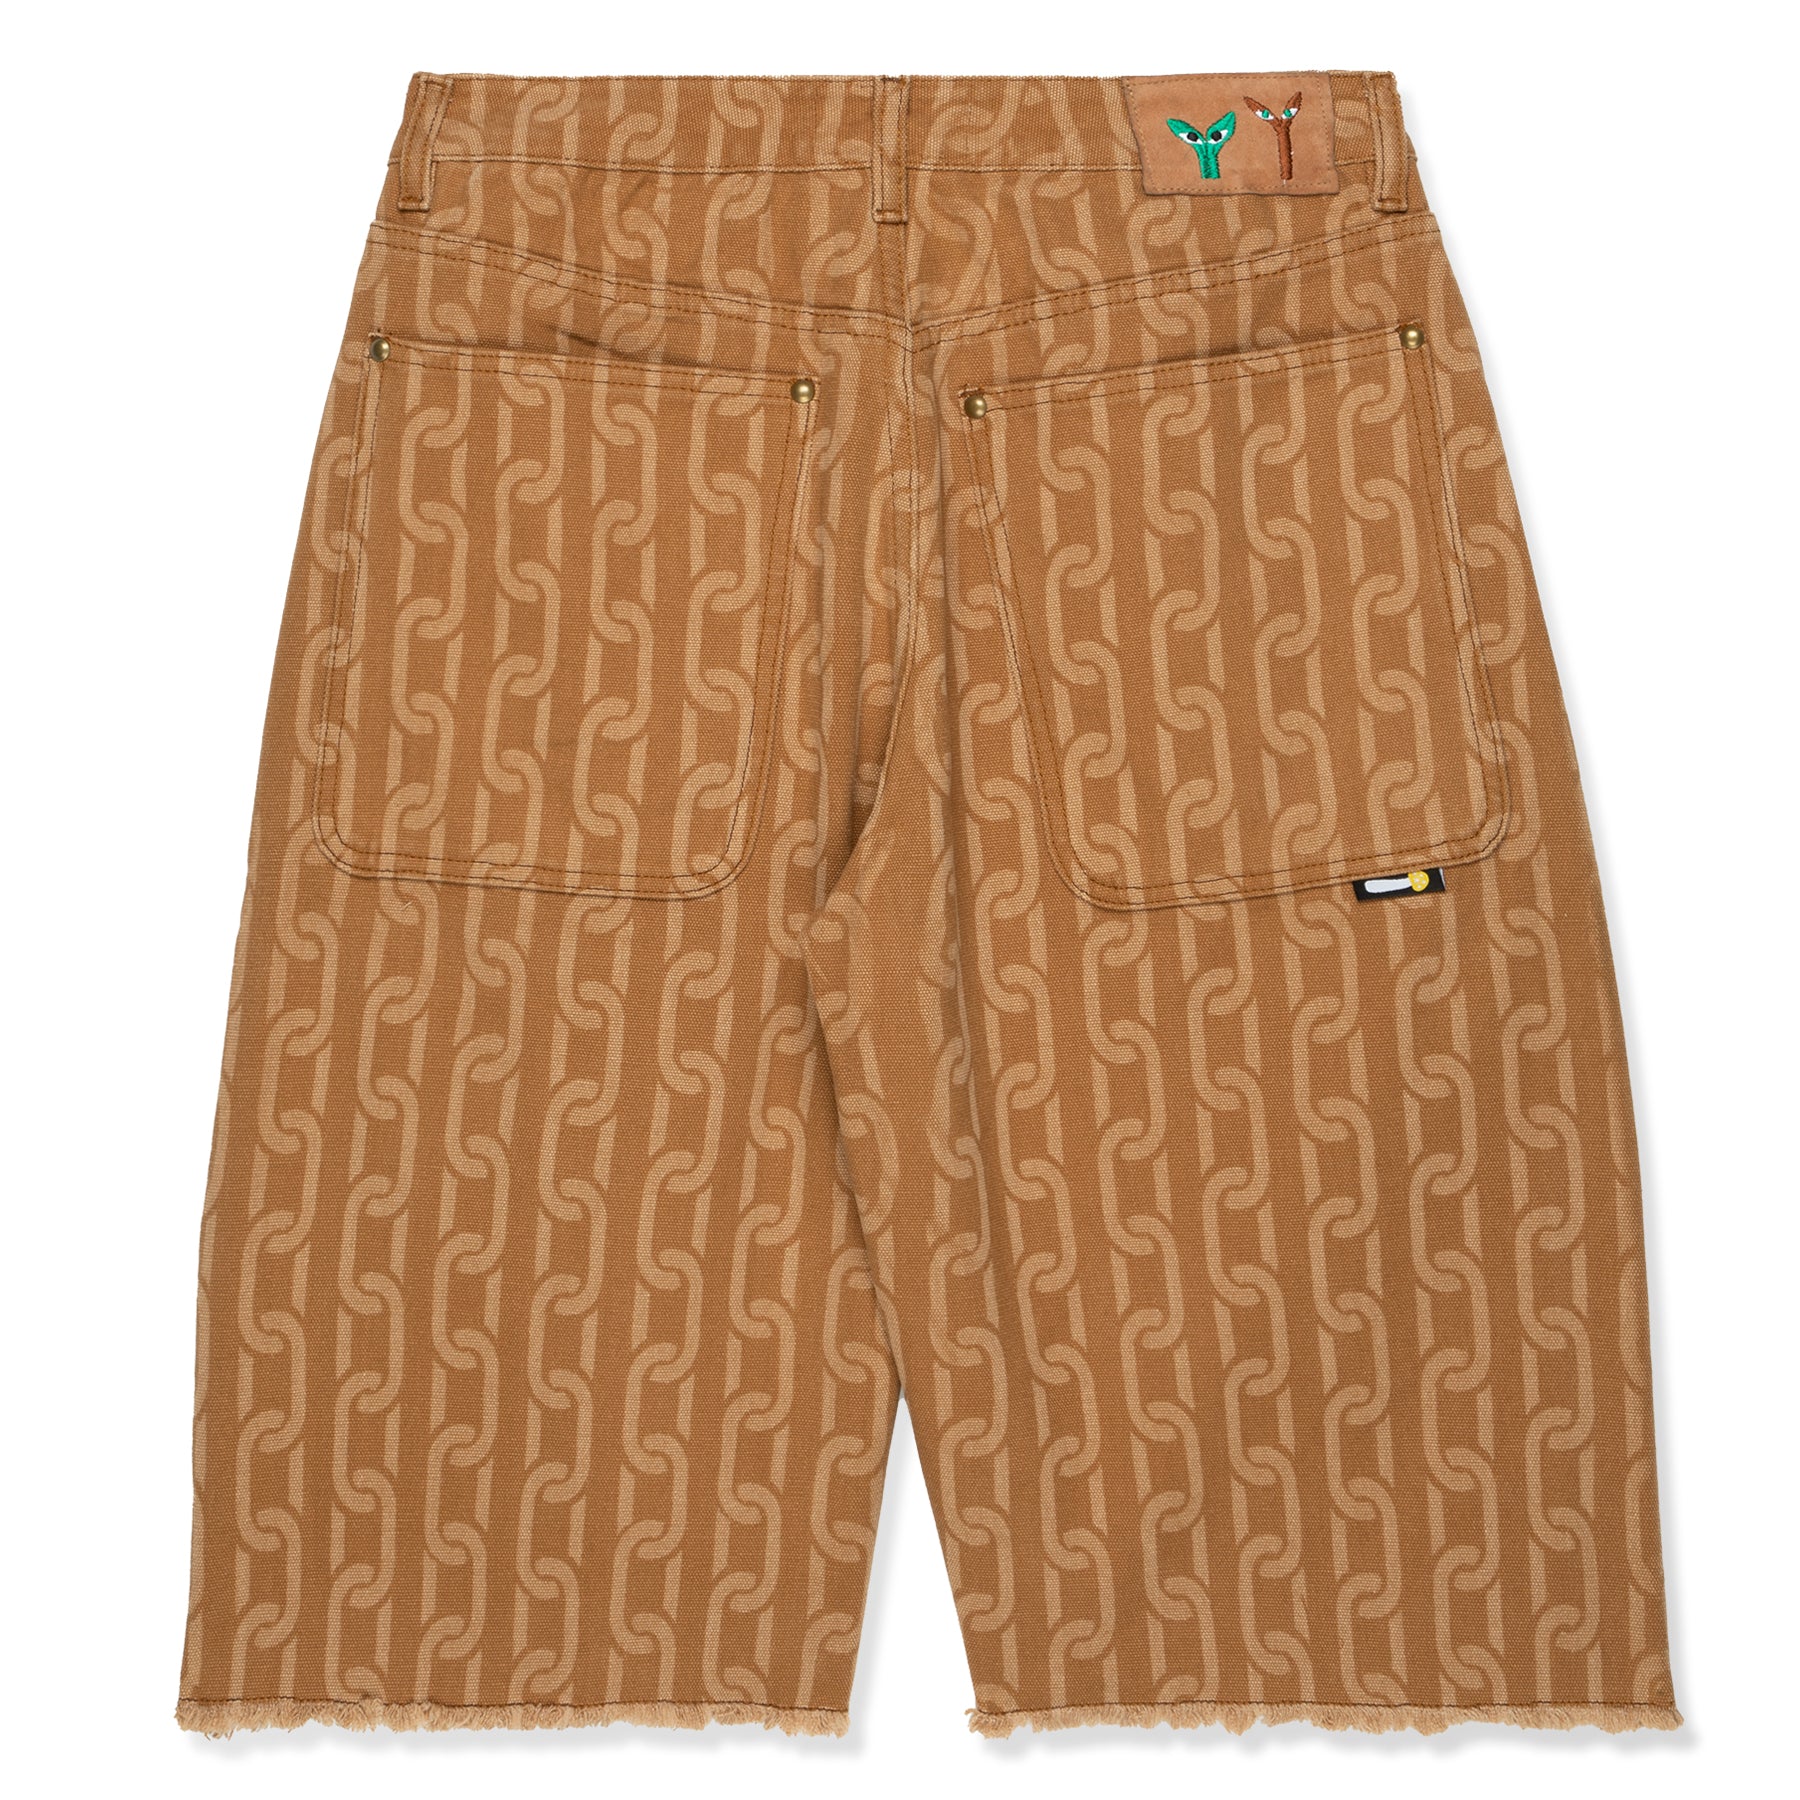 Stingwater Signature Chain Double Knee Shorts (Tan) – Concepts